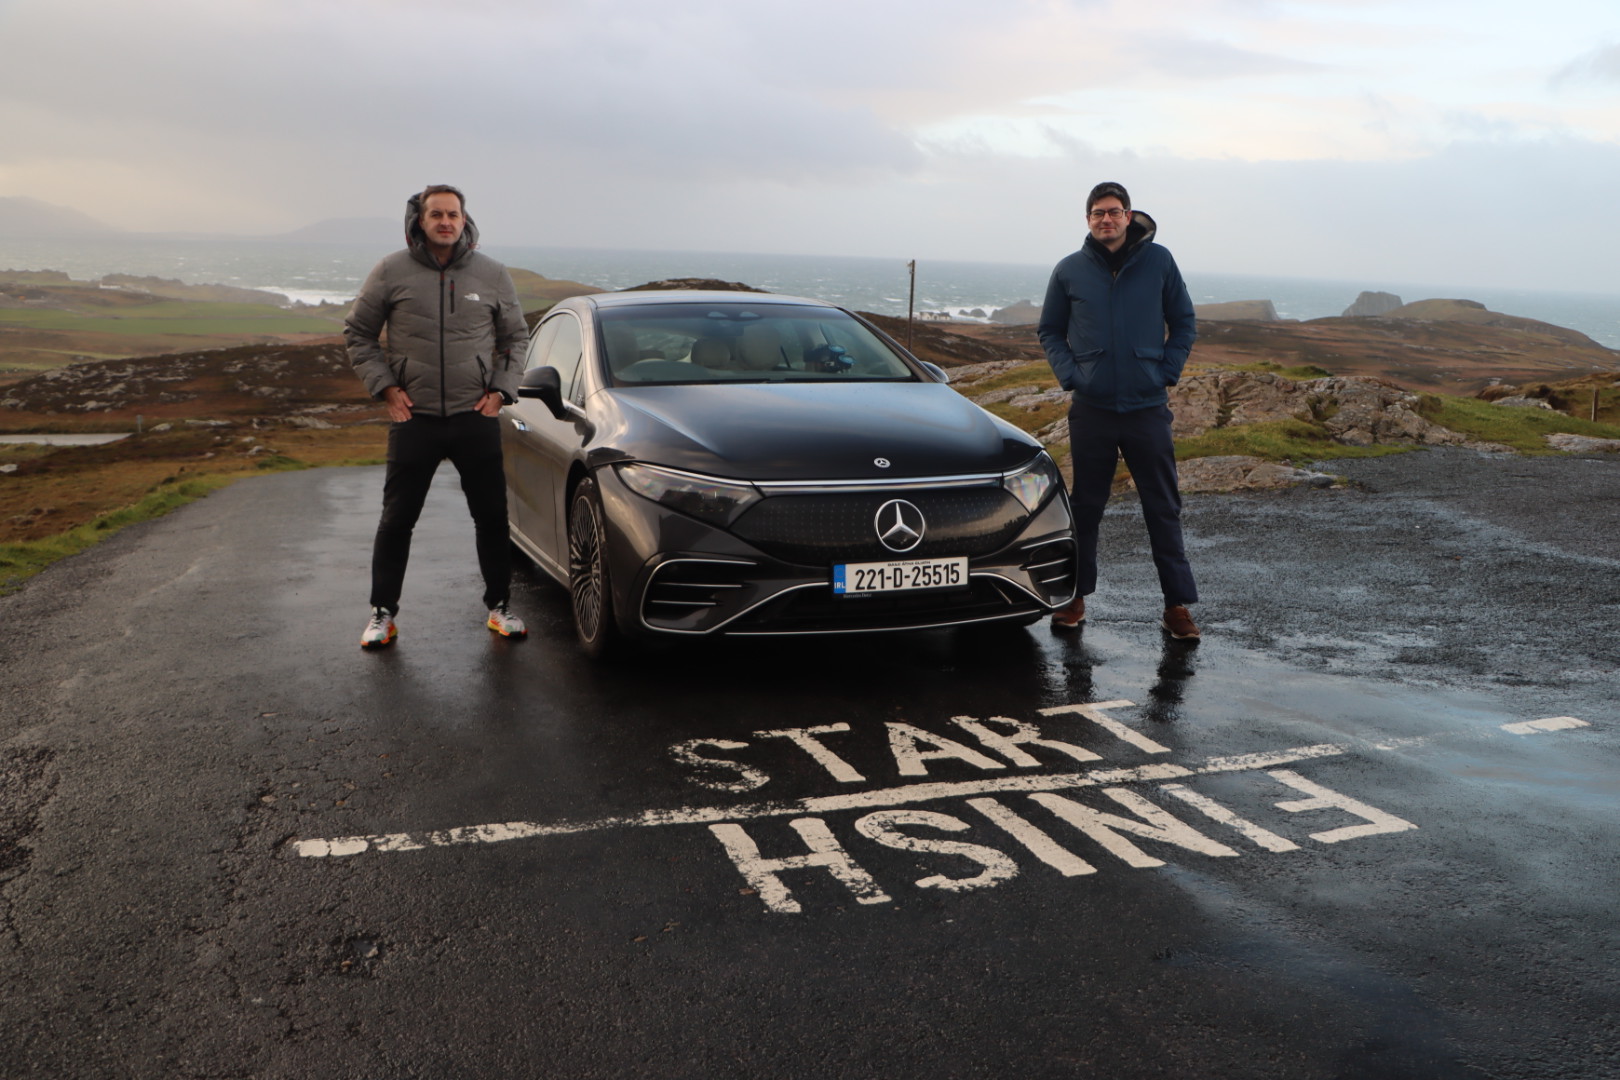 AA Ireland drives EV the full length of Ireland on one full charge